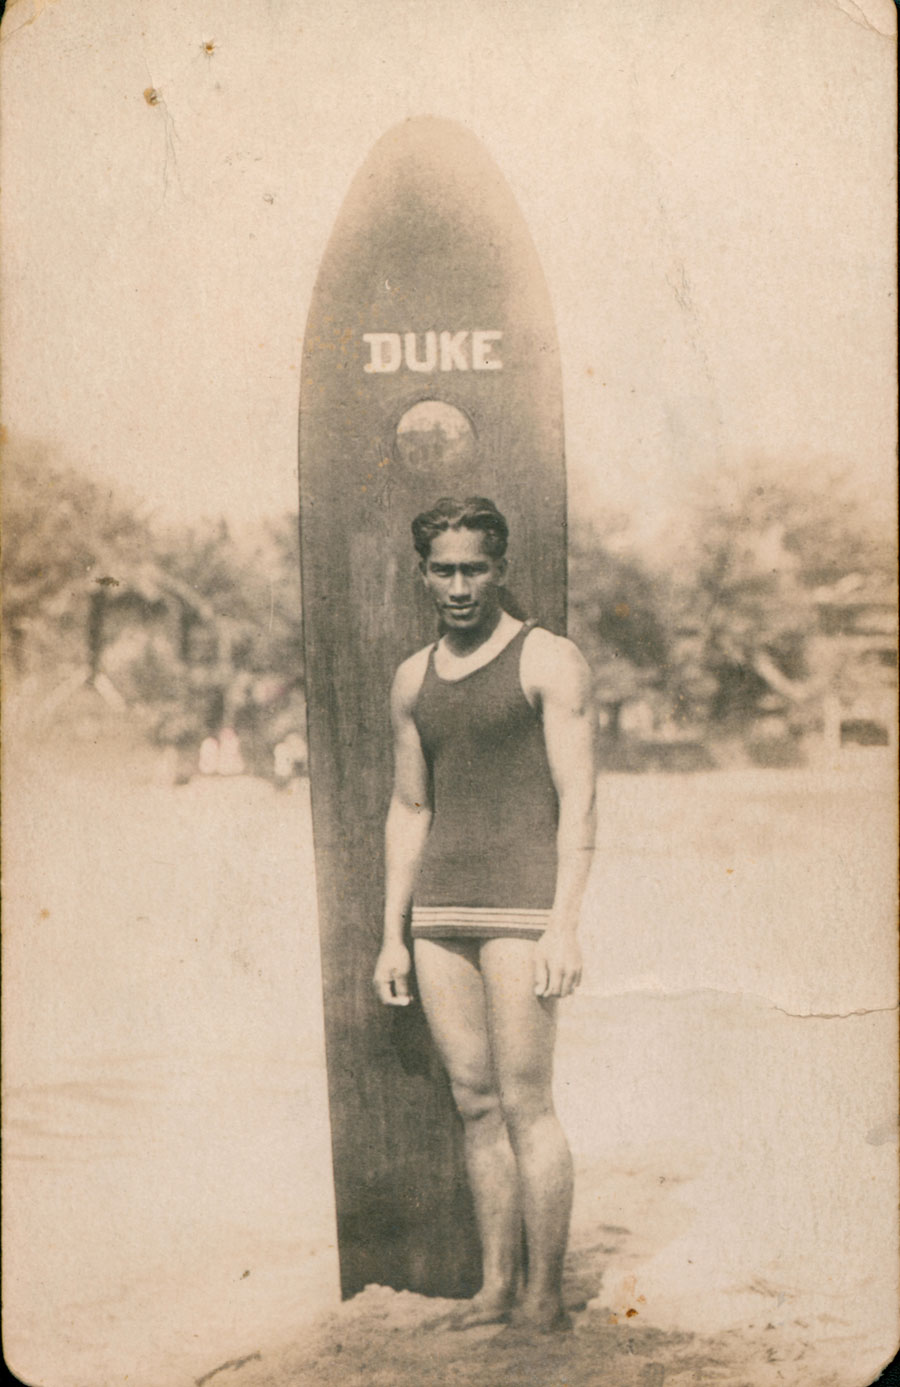 Image 3 of 6 - This postcard depicts Hawaiian champion swimmer and surfer Duke Kahanamoku in about 1915. Duke gave a legendary demonstration of surfing techniques at Freshwater Beach on 24 December 1914.